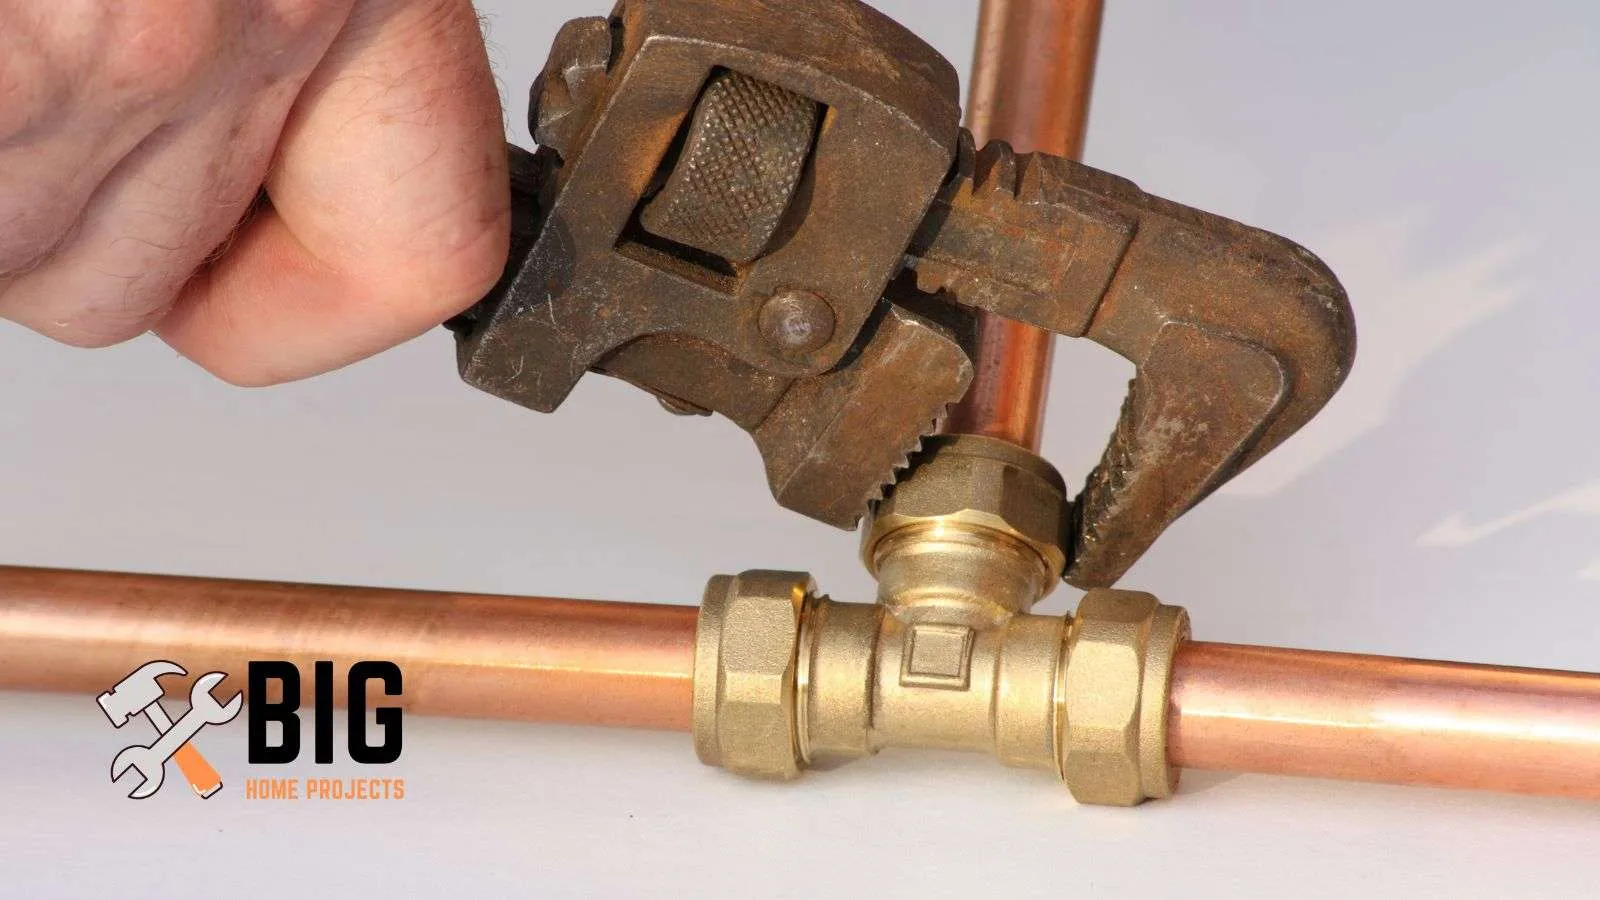 Copper pipes - bighomeprojects.com